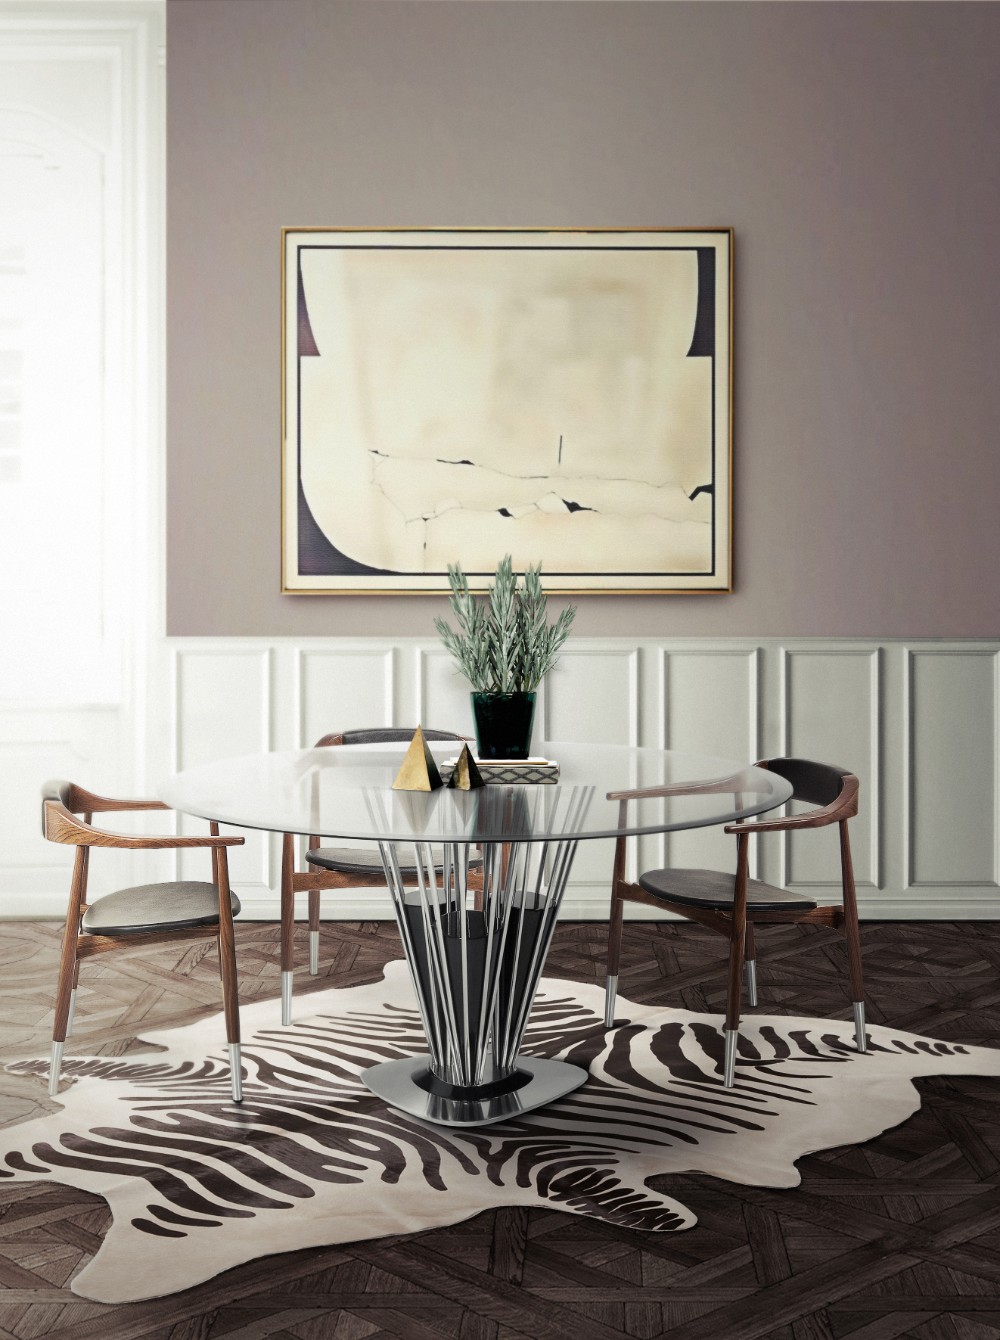 The Ultimate Dining Room Decor Solutions for Your Fall Decor!